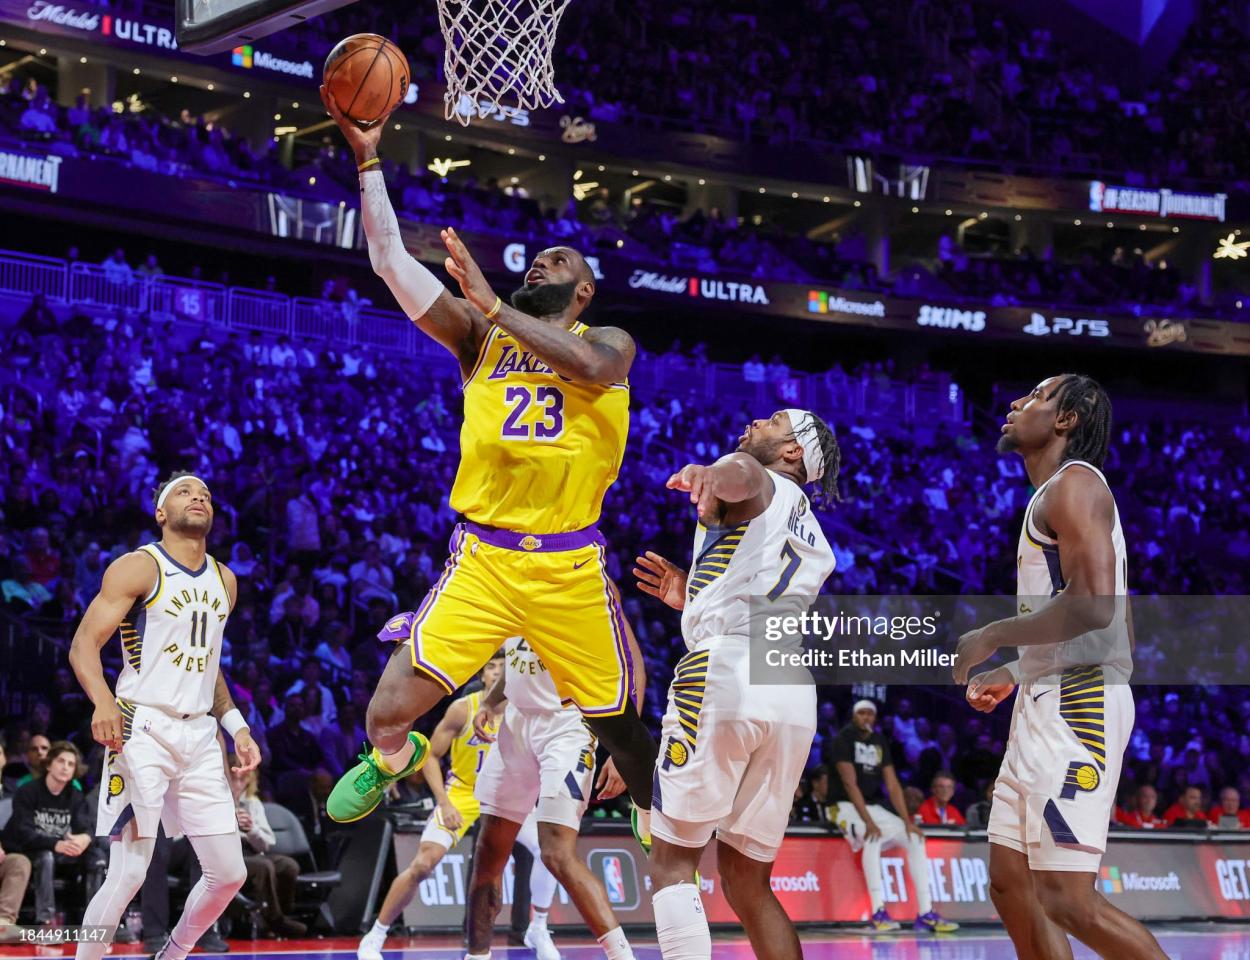 LeBron James #23 of the Los Angeles Lakers shoots a layup against Buddy Hield #7 of the Indiana Pacers in the second quarter of the championship game of the inaugural NBA In-Season Tournament at T-Mobile Arena on December 09, 2023 in Las Vegas, Nevada. The Lakers defeated the Pacers 123-109. NOTE TO USER: User expressly acknowledges and agrees that, by downloading and or using this photograph, User is consenting to the terms and conditions of the Getty Images License Agreement. (Photo by Ethan Miller/Getty Images)